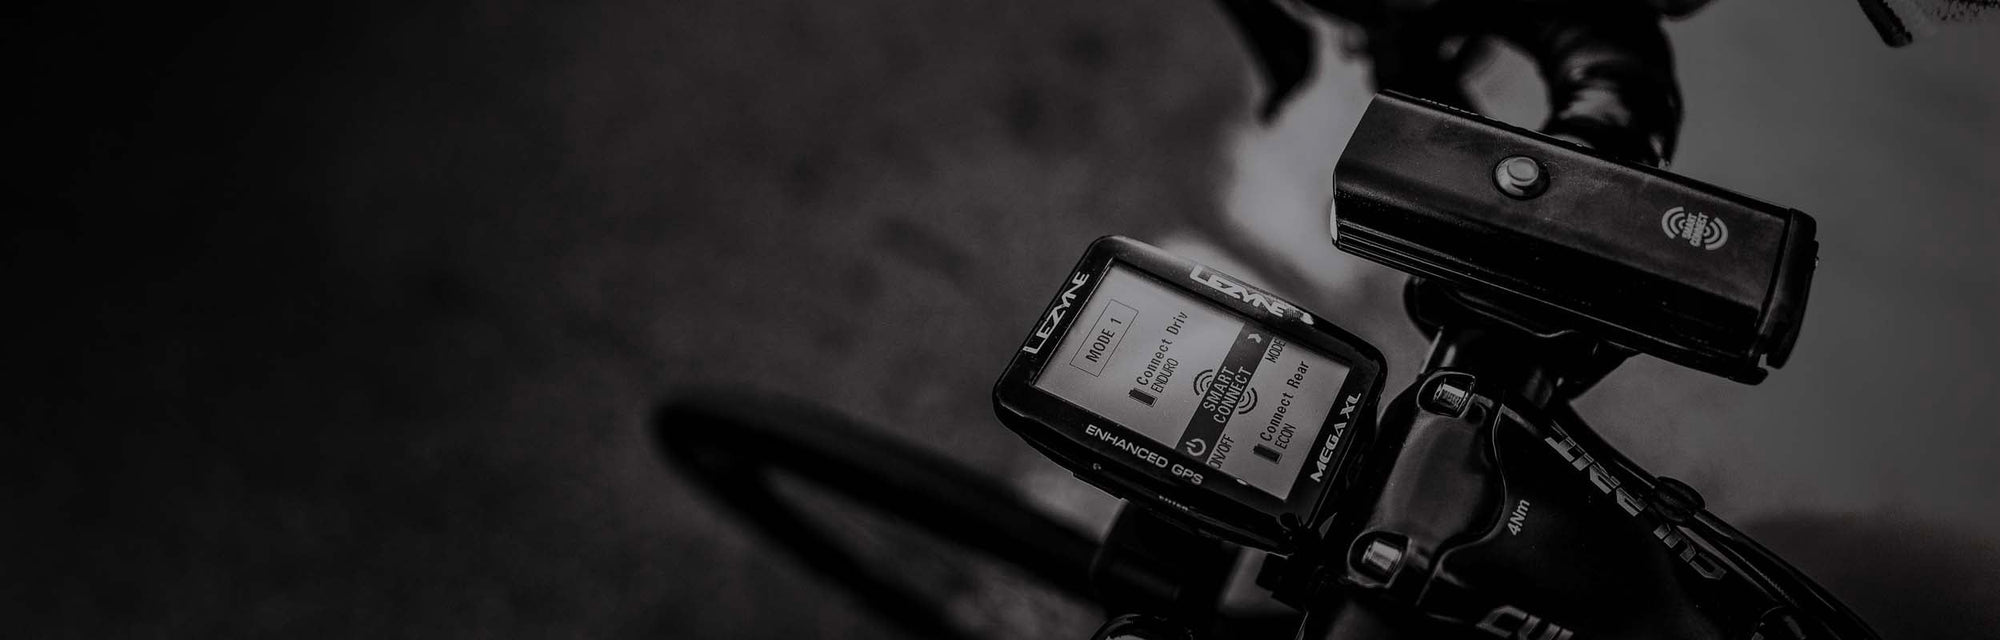 A GPS computer and a light with the words smart connect printed on it mounted to a bicycles handlebars.